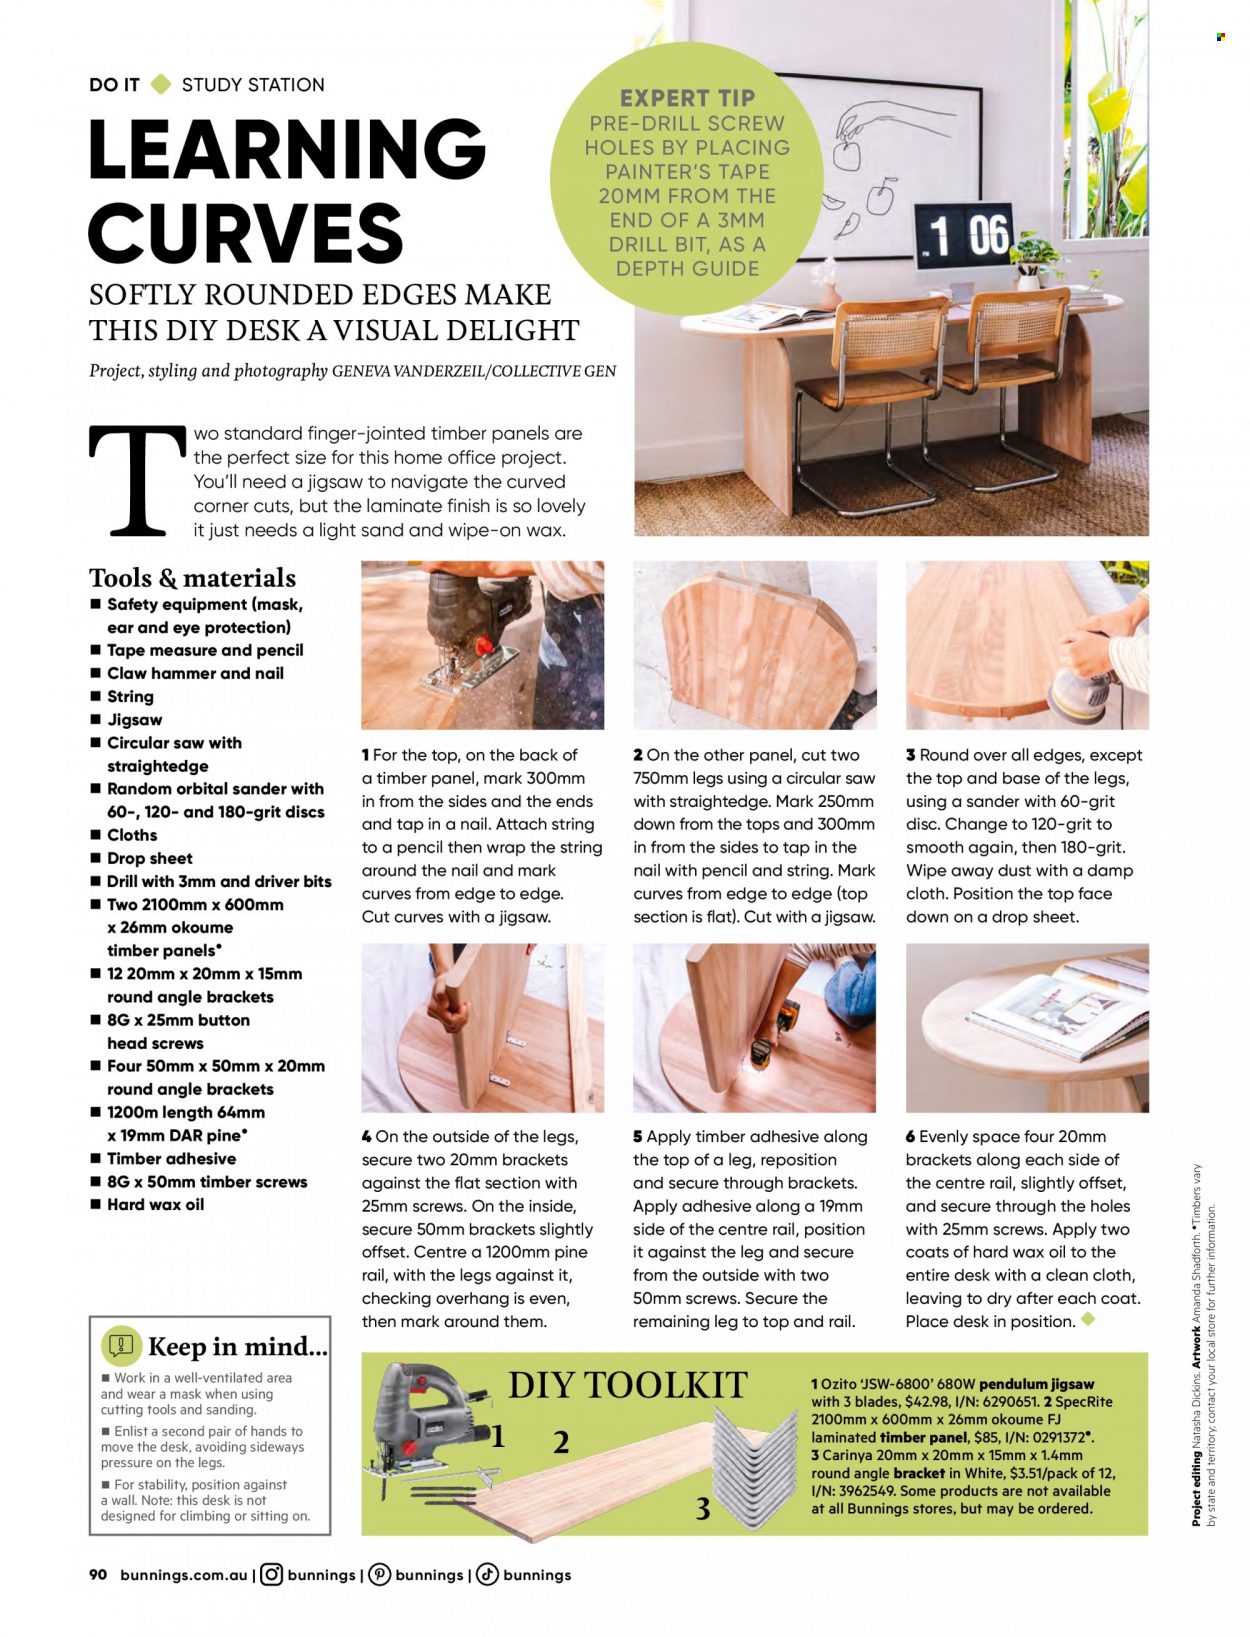 thumbnail - Bunnings Warehouse mailer - 01.05.2023 - 30.06.2023 - Sales products - top section, desk, adhesive, plastic drop sheet, hammer, circular saw, saw, jig saw, claw hammer, measuring tape. Page 90.